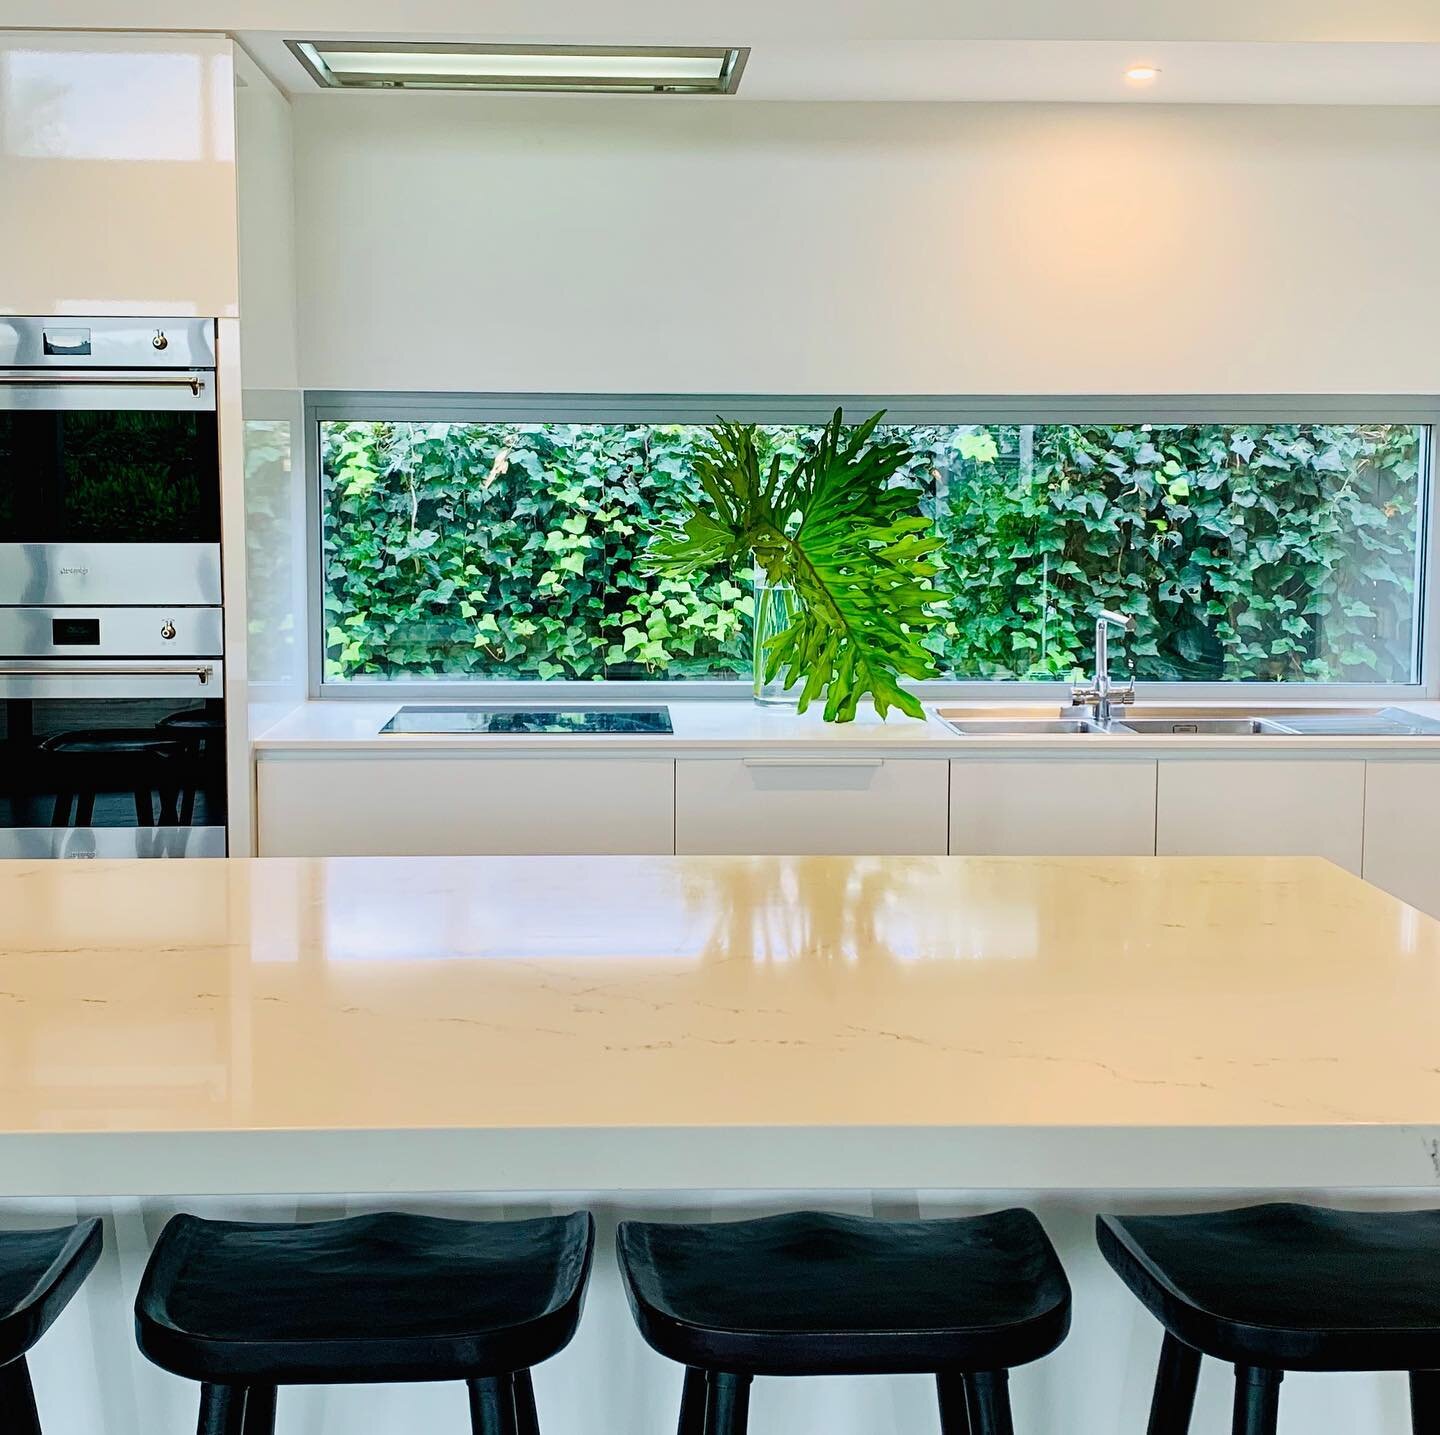 This glass splashback not only brings in the natural light but adds depth and colour to the space 🌿 #doubleglazedwindows #ivy #perthlandscape #glasssplashback #cottesloebuilder #newhomeconstruction #cottesloerenovations #newhomedesigns #architectspe